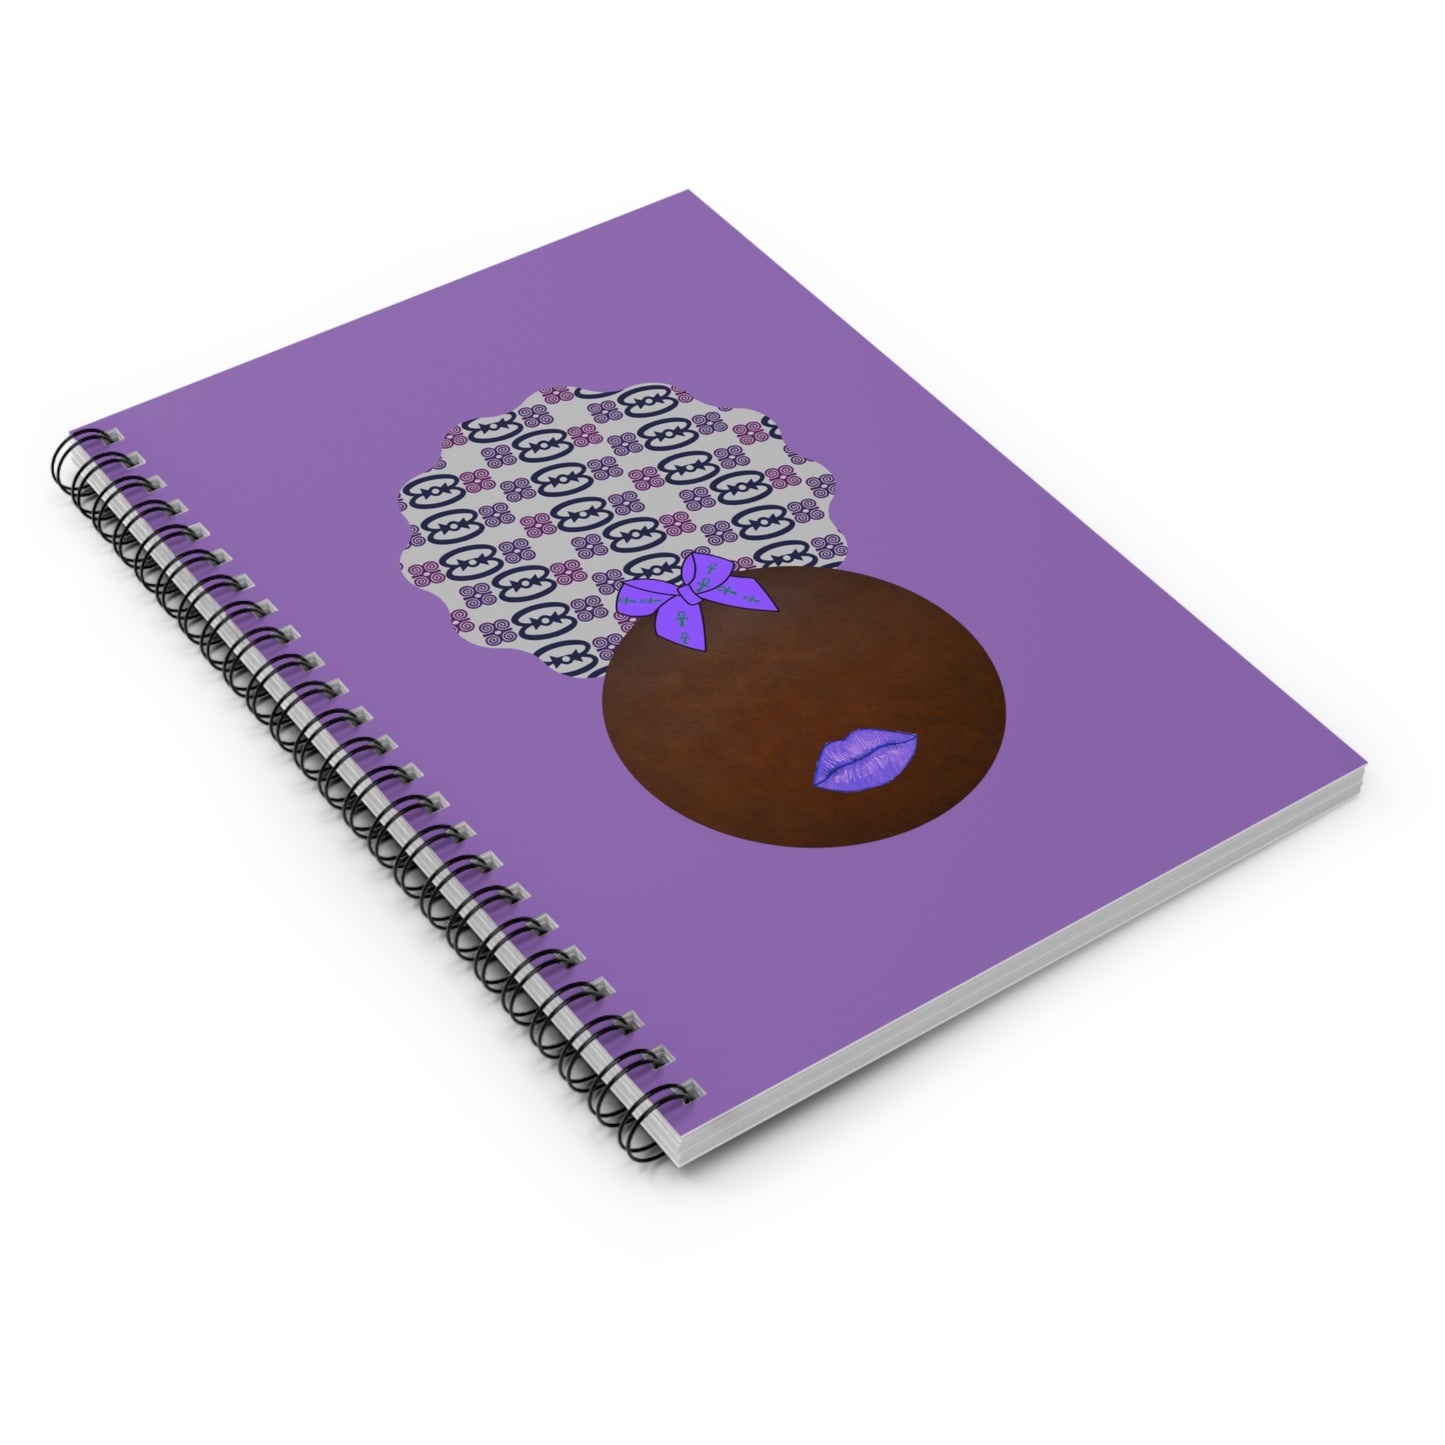 Purple Puff Spiral Notebook - College Ruled Lines 6"x8"